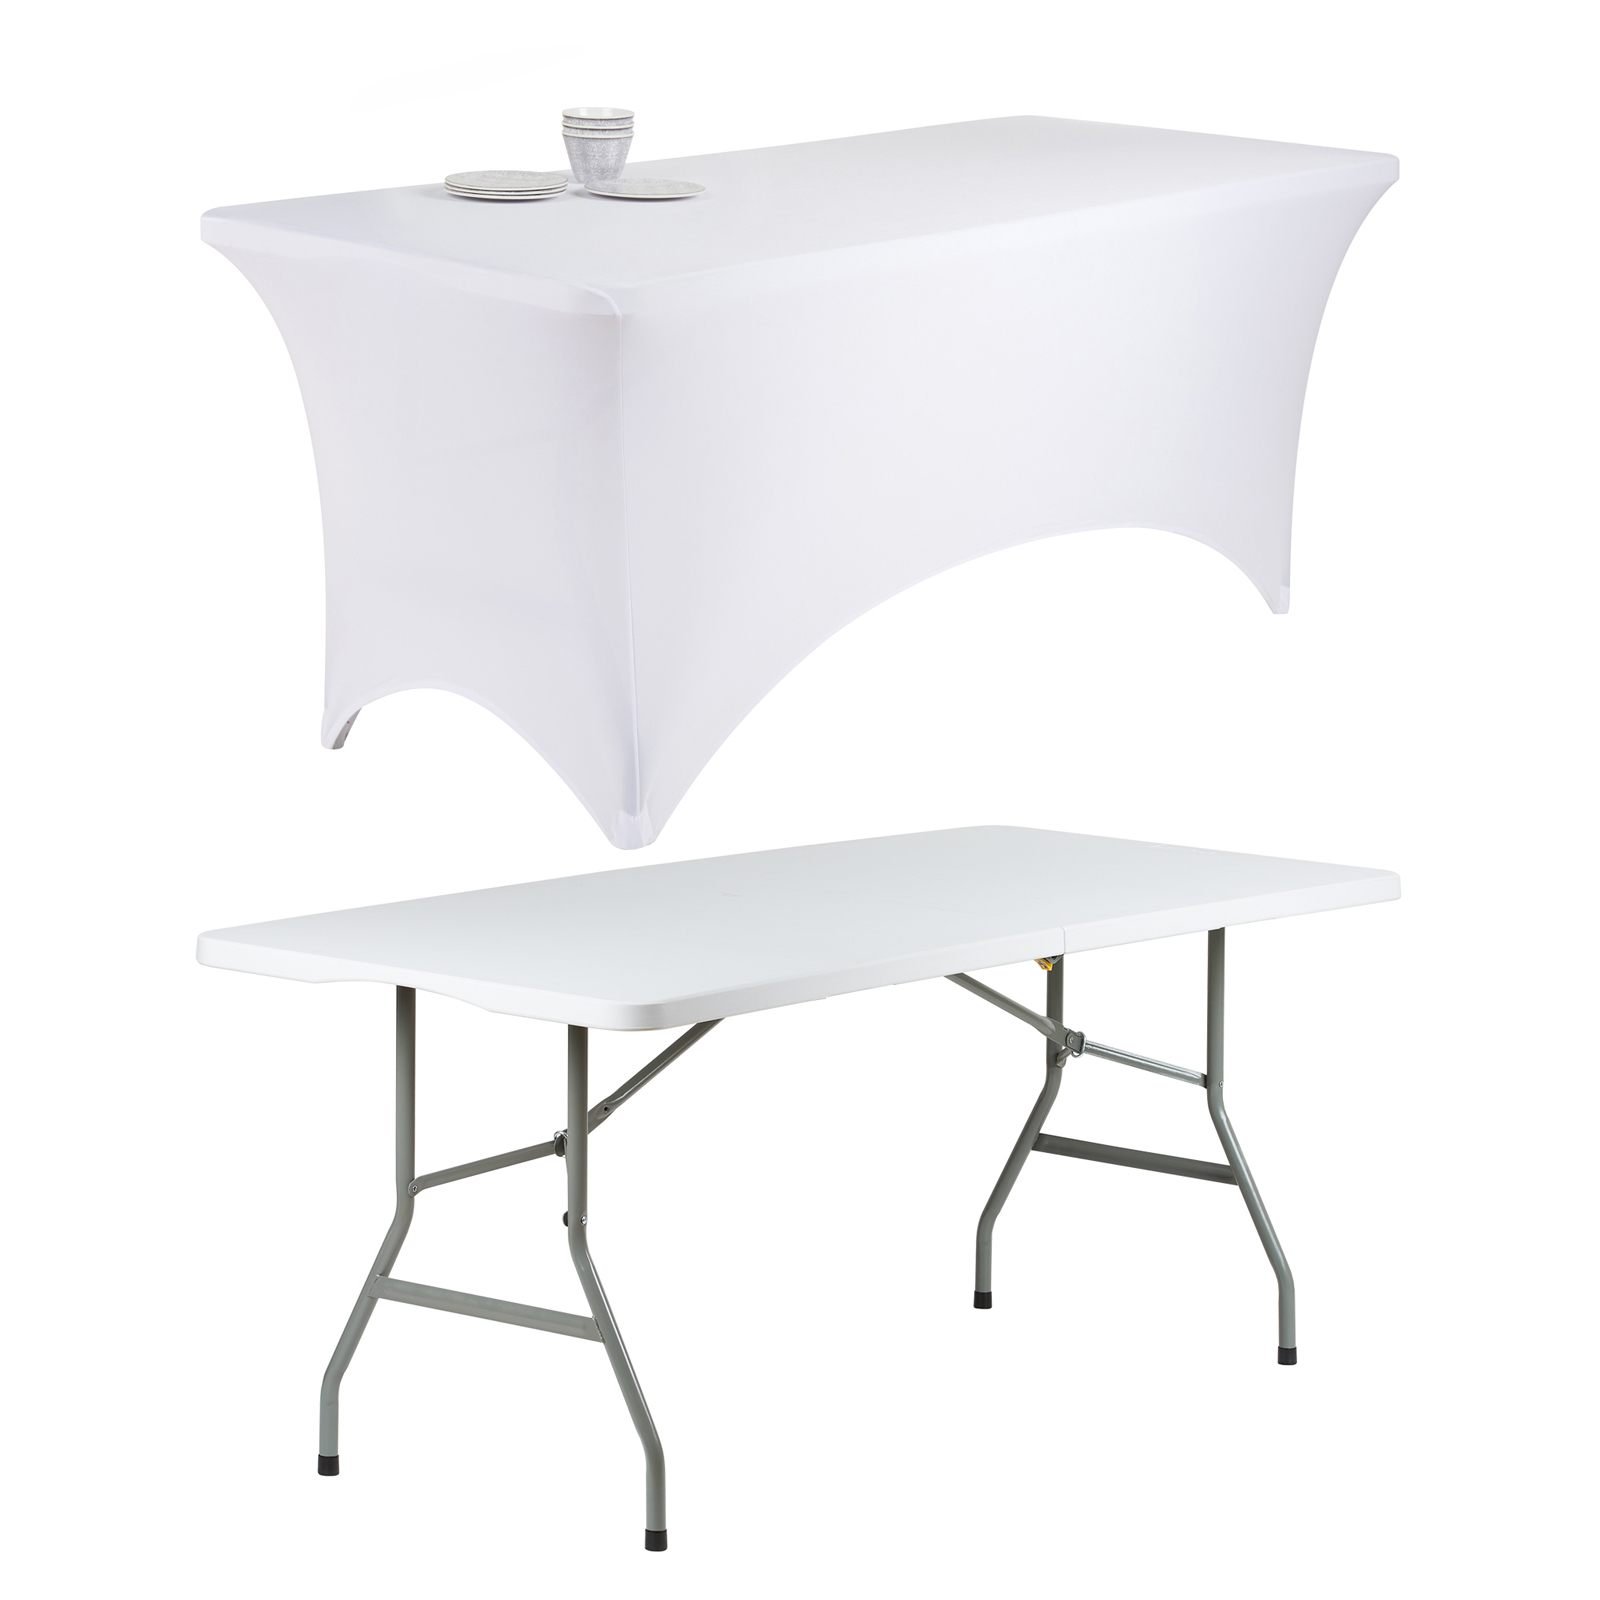 Tablecloth For 6 Foot Folding Table • Display Cabinet